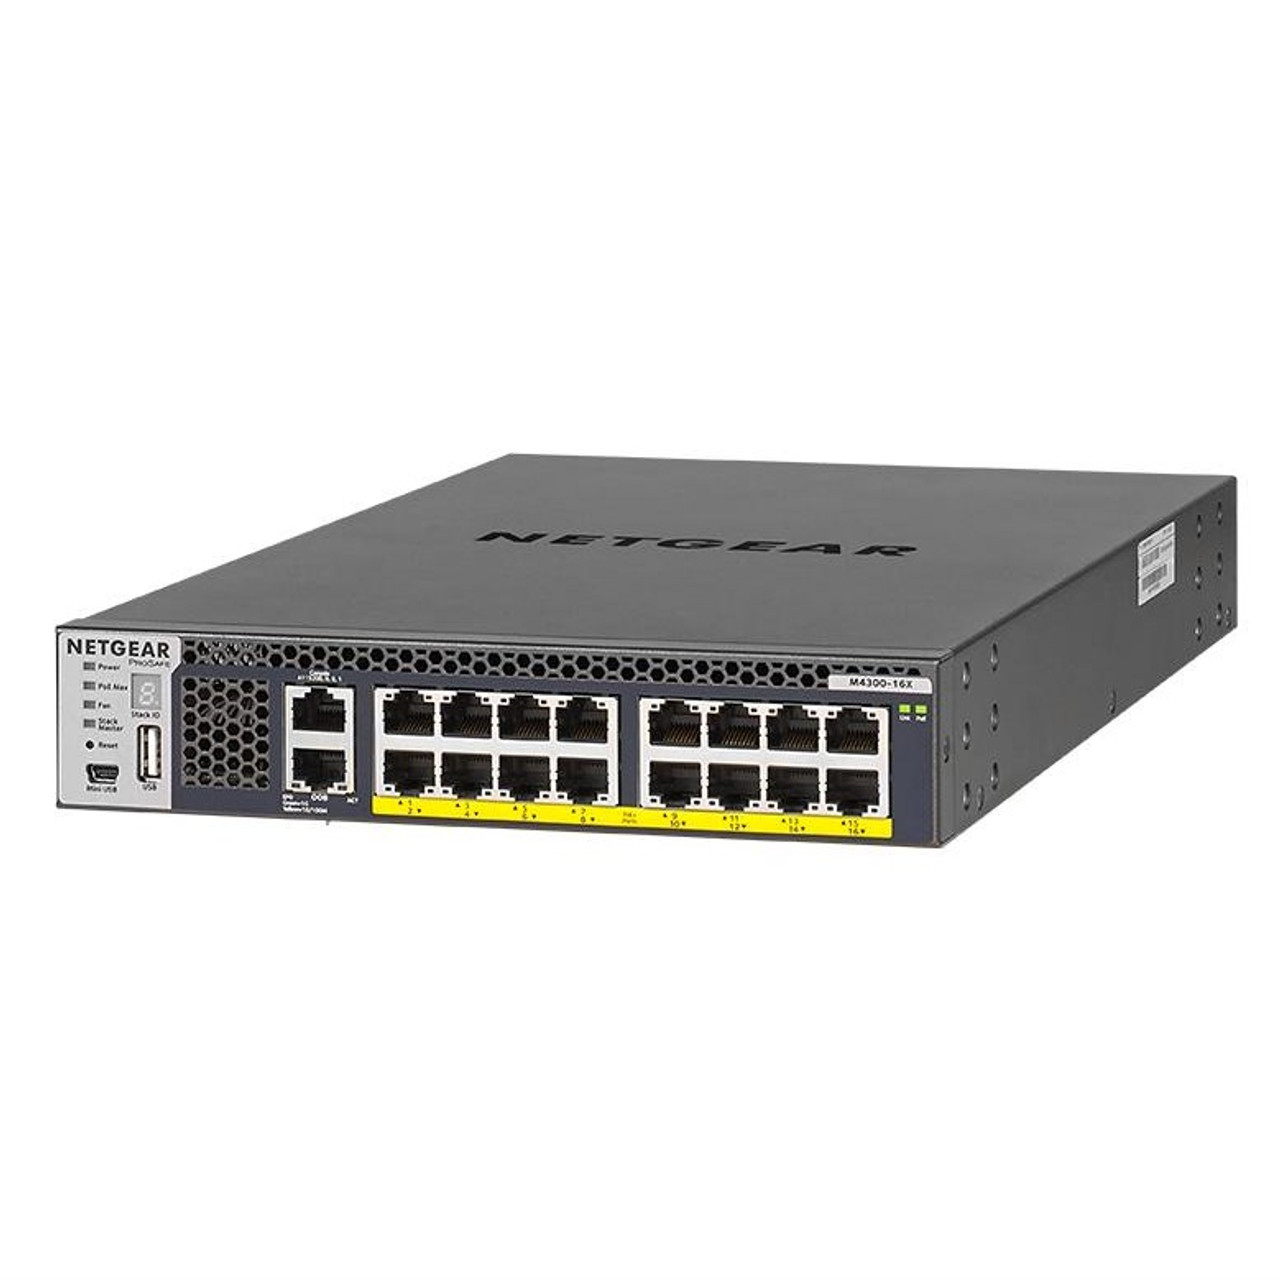 Netgear M4300-16X 16x10G/Multi-Gig PoE Layer 3 Stackable Managed Switch